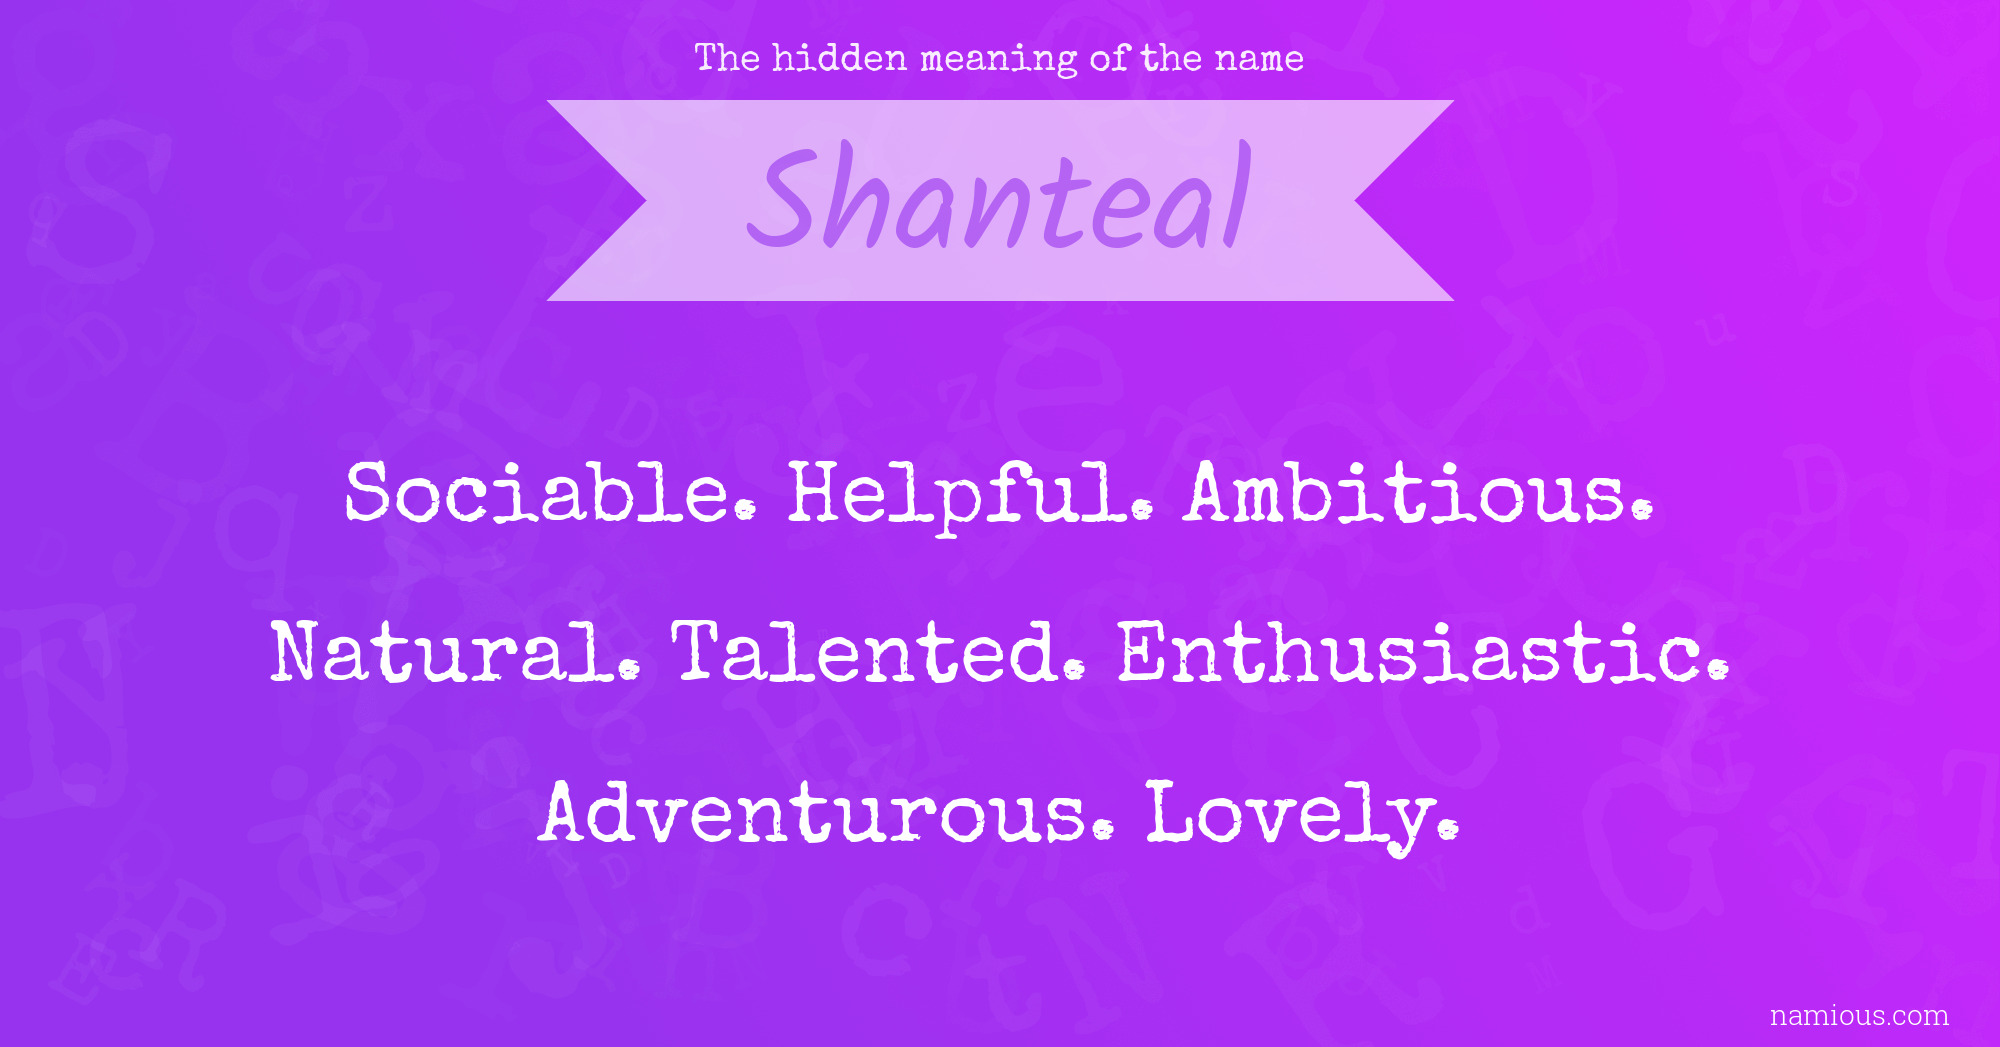 The hidden meaning of the name Shanteal